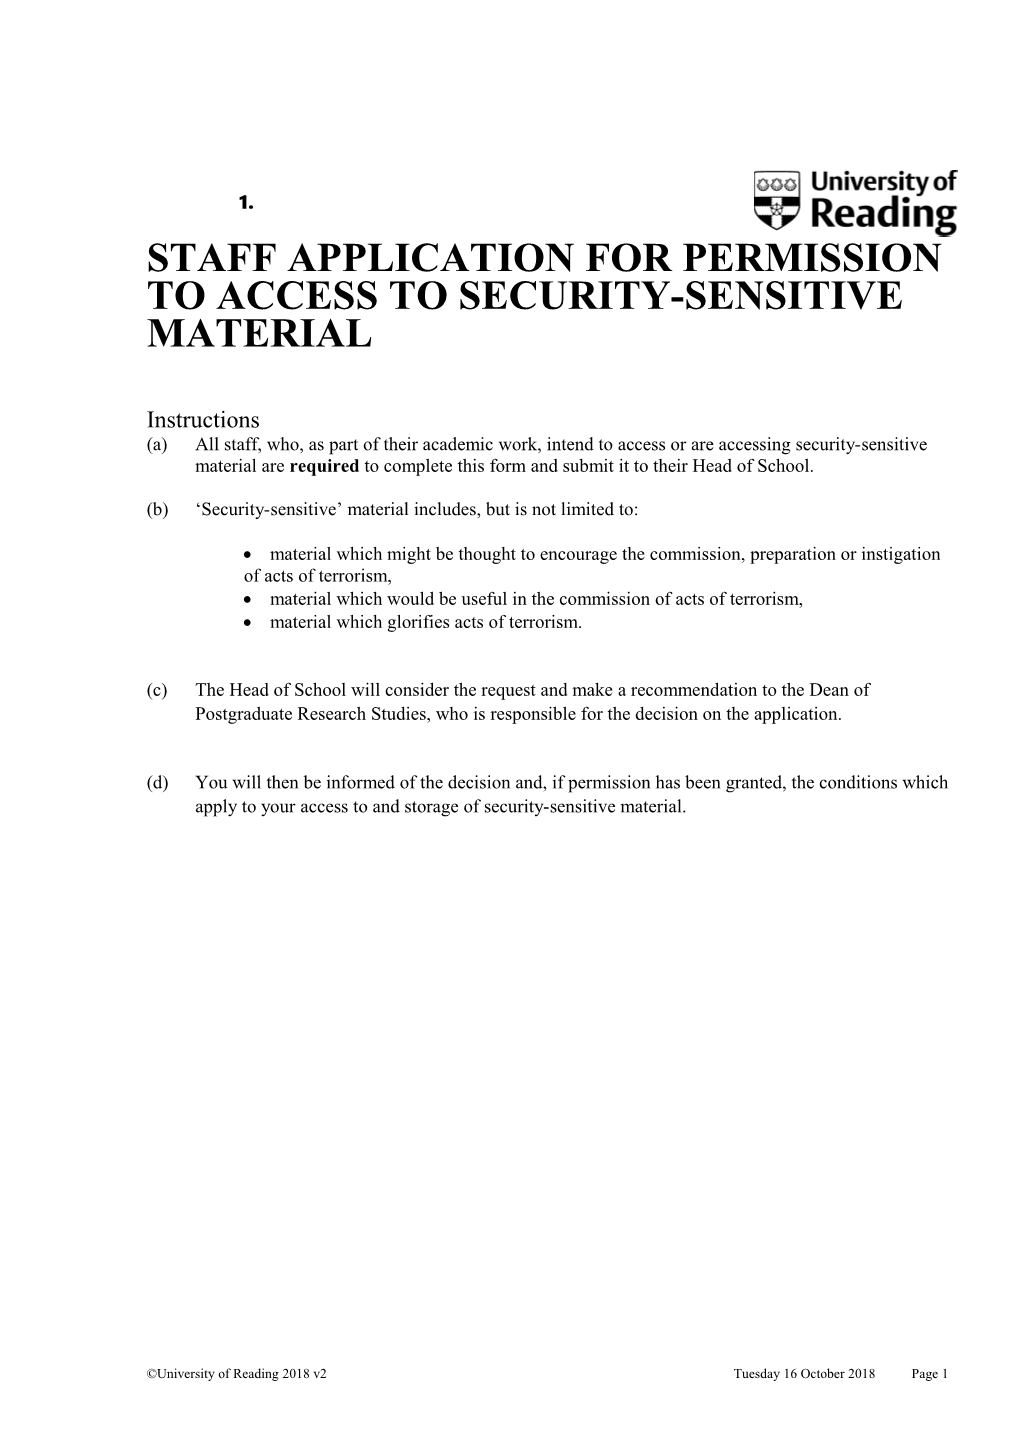 Staff Application for Permission to Access to Security-Sensitive Material